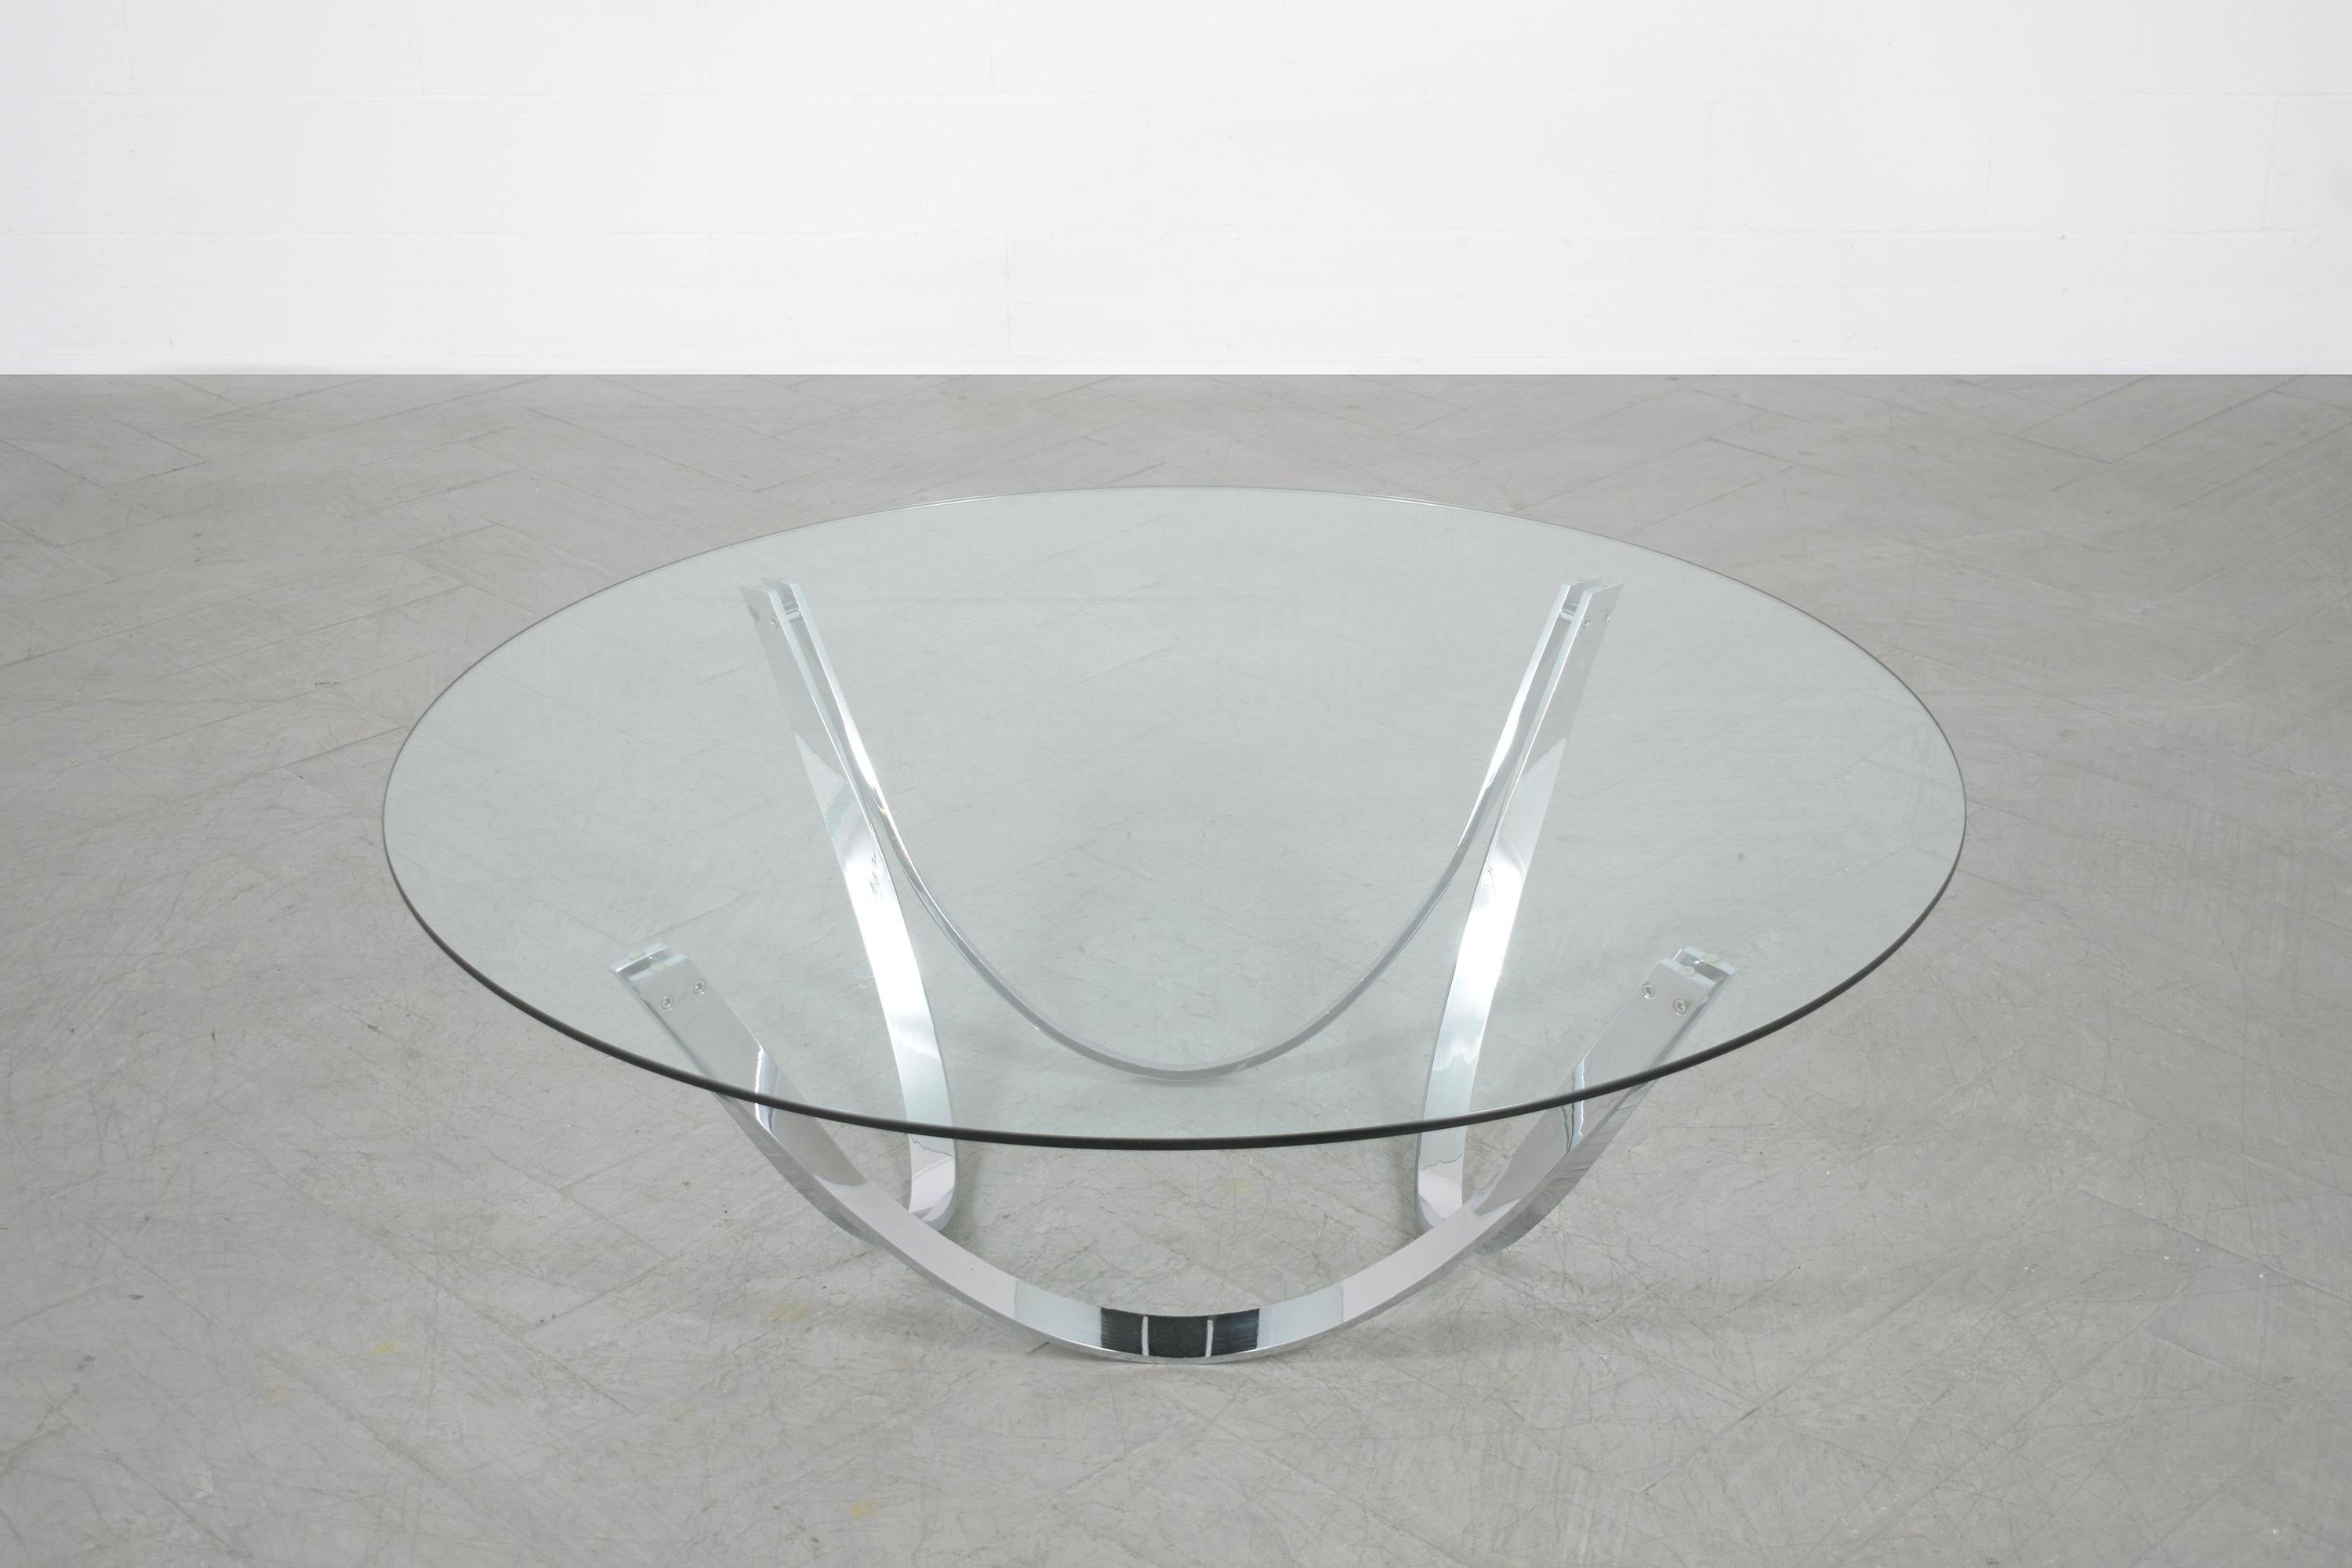 American 1960s Mid-Century Modern Coffee Table: A Fusion of Steel and Glass